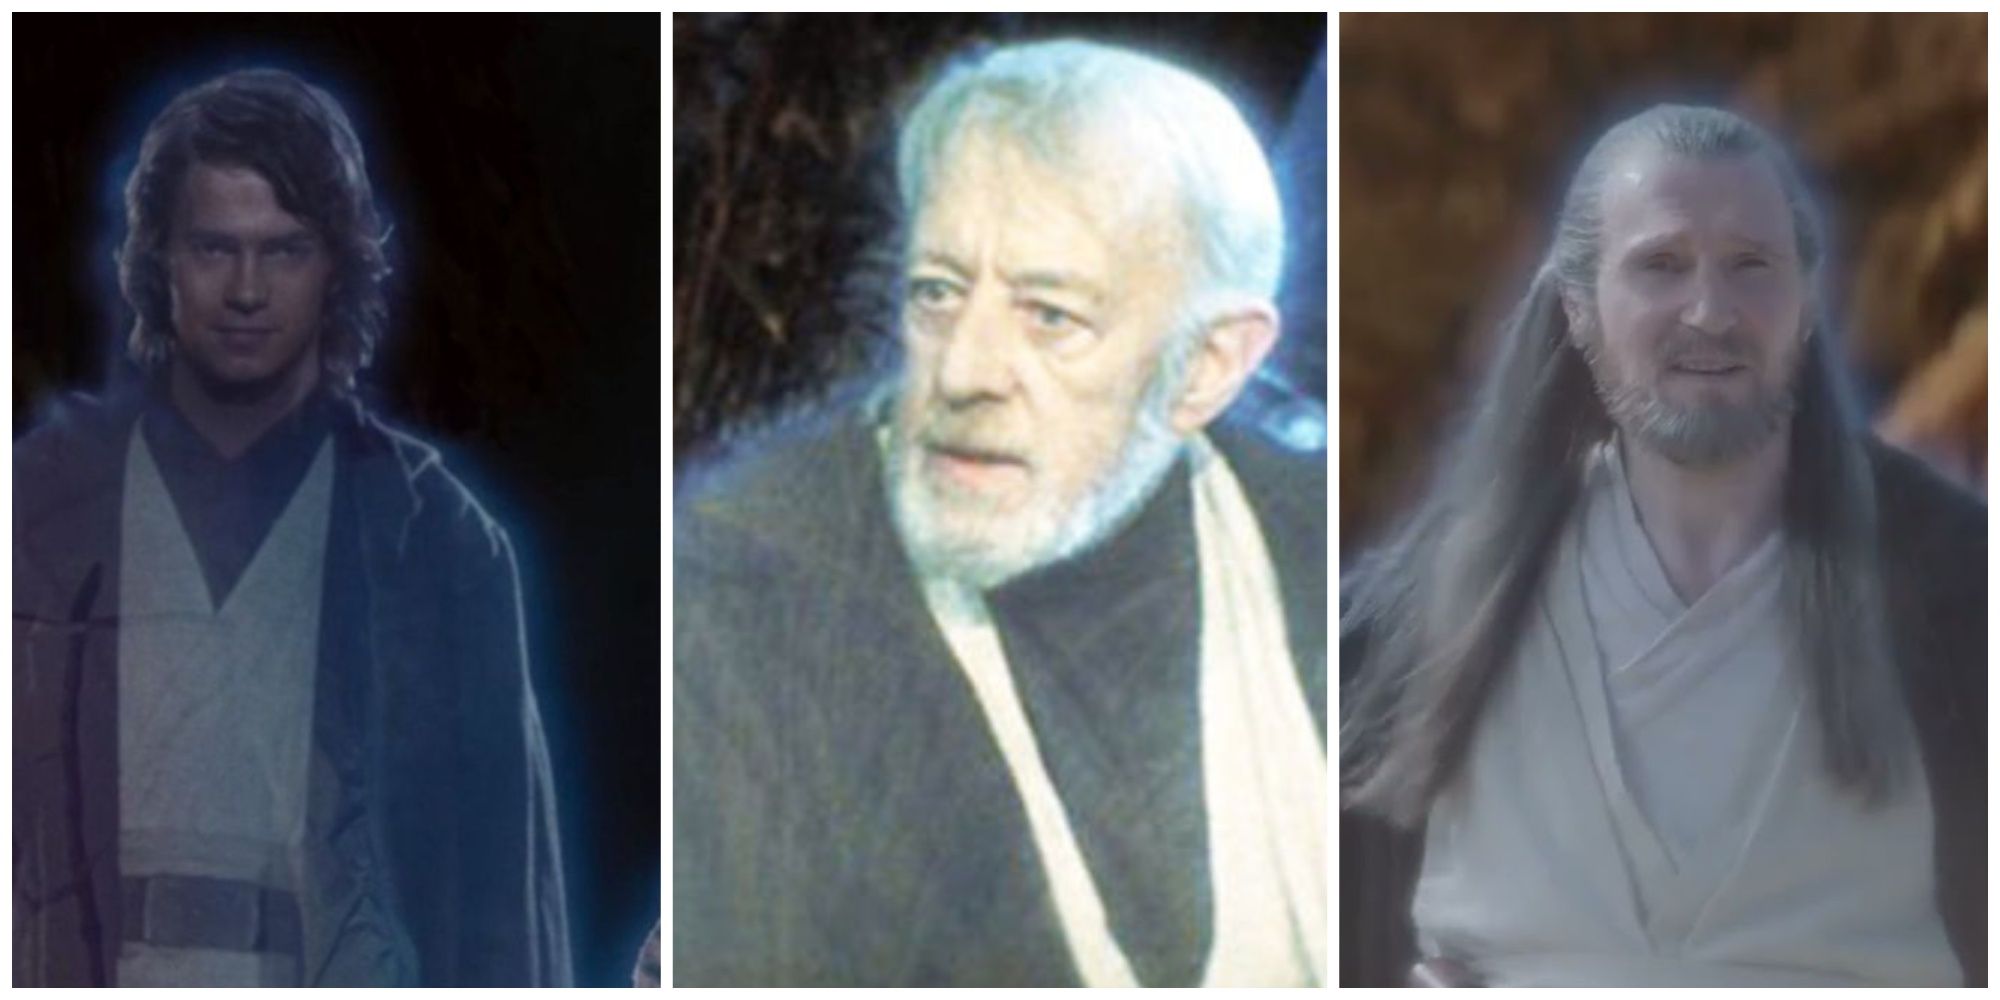 Split image showing Force ghosts of Anakin, Obi-Wan, and Qui-Gon.